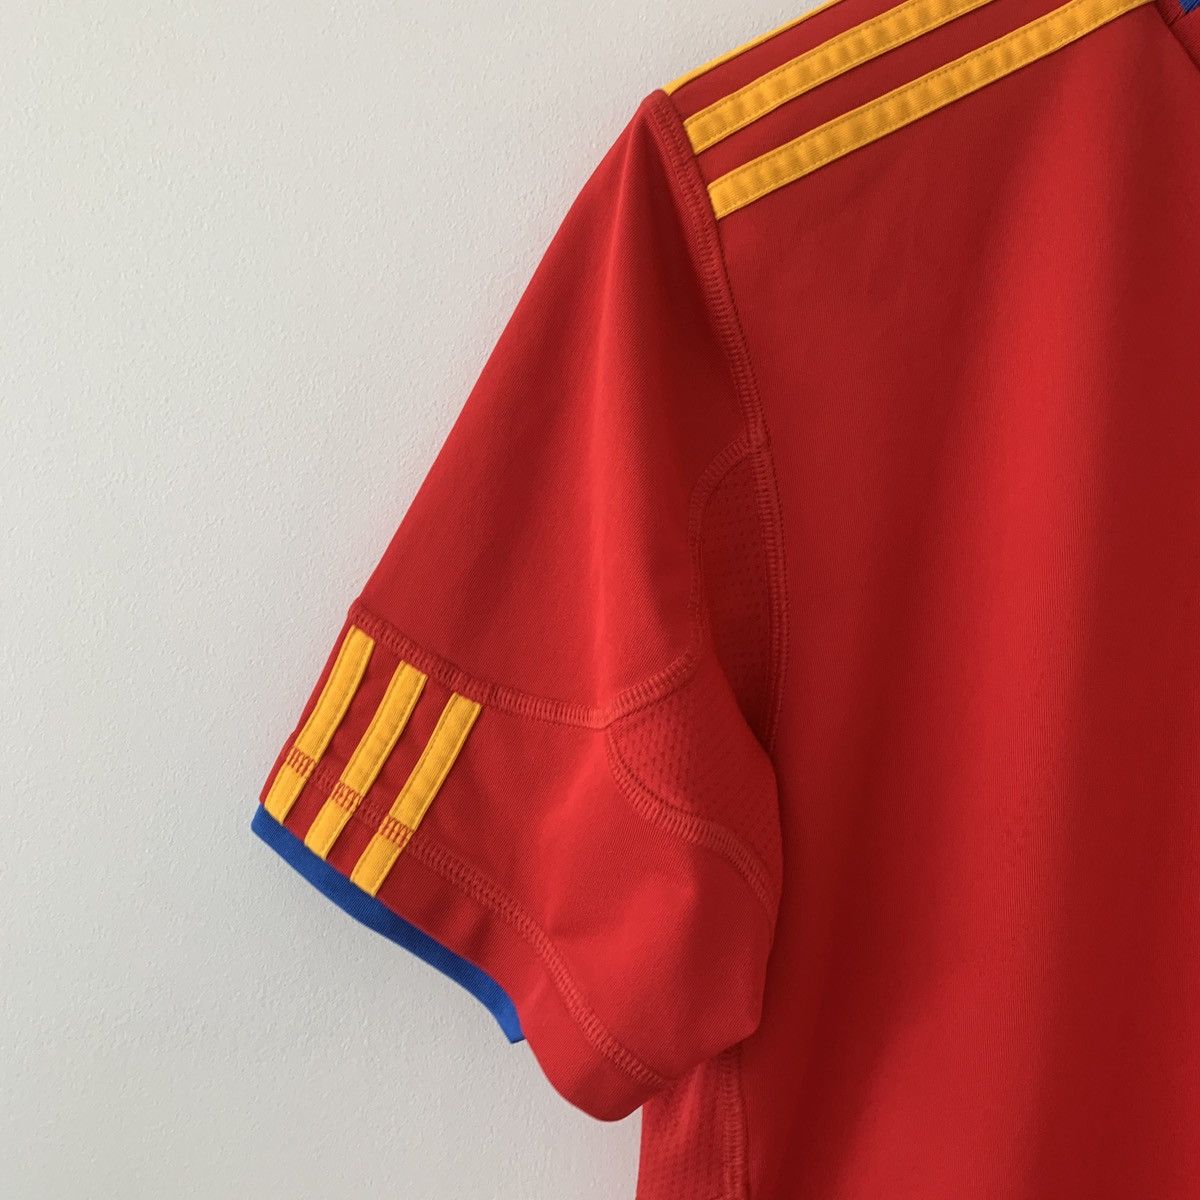 Adidas Adidas 2010 Spain RFCF Soccer Jersey World Cup Drake Style Size US M / EU 48-50 / 2 - 3 Thumbnail